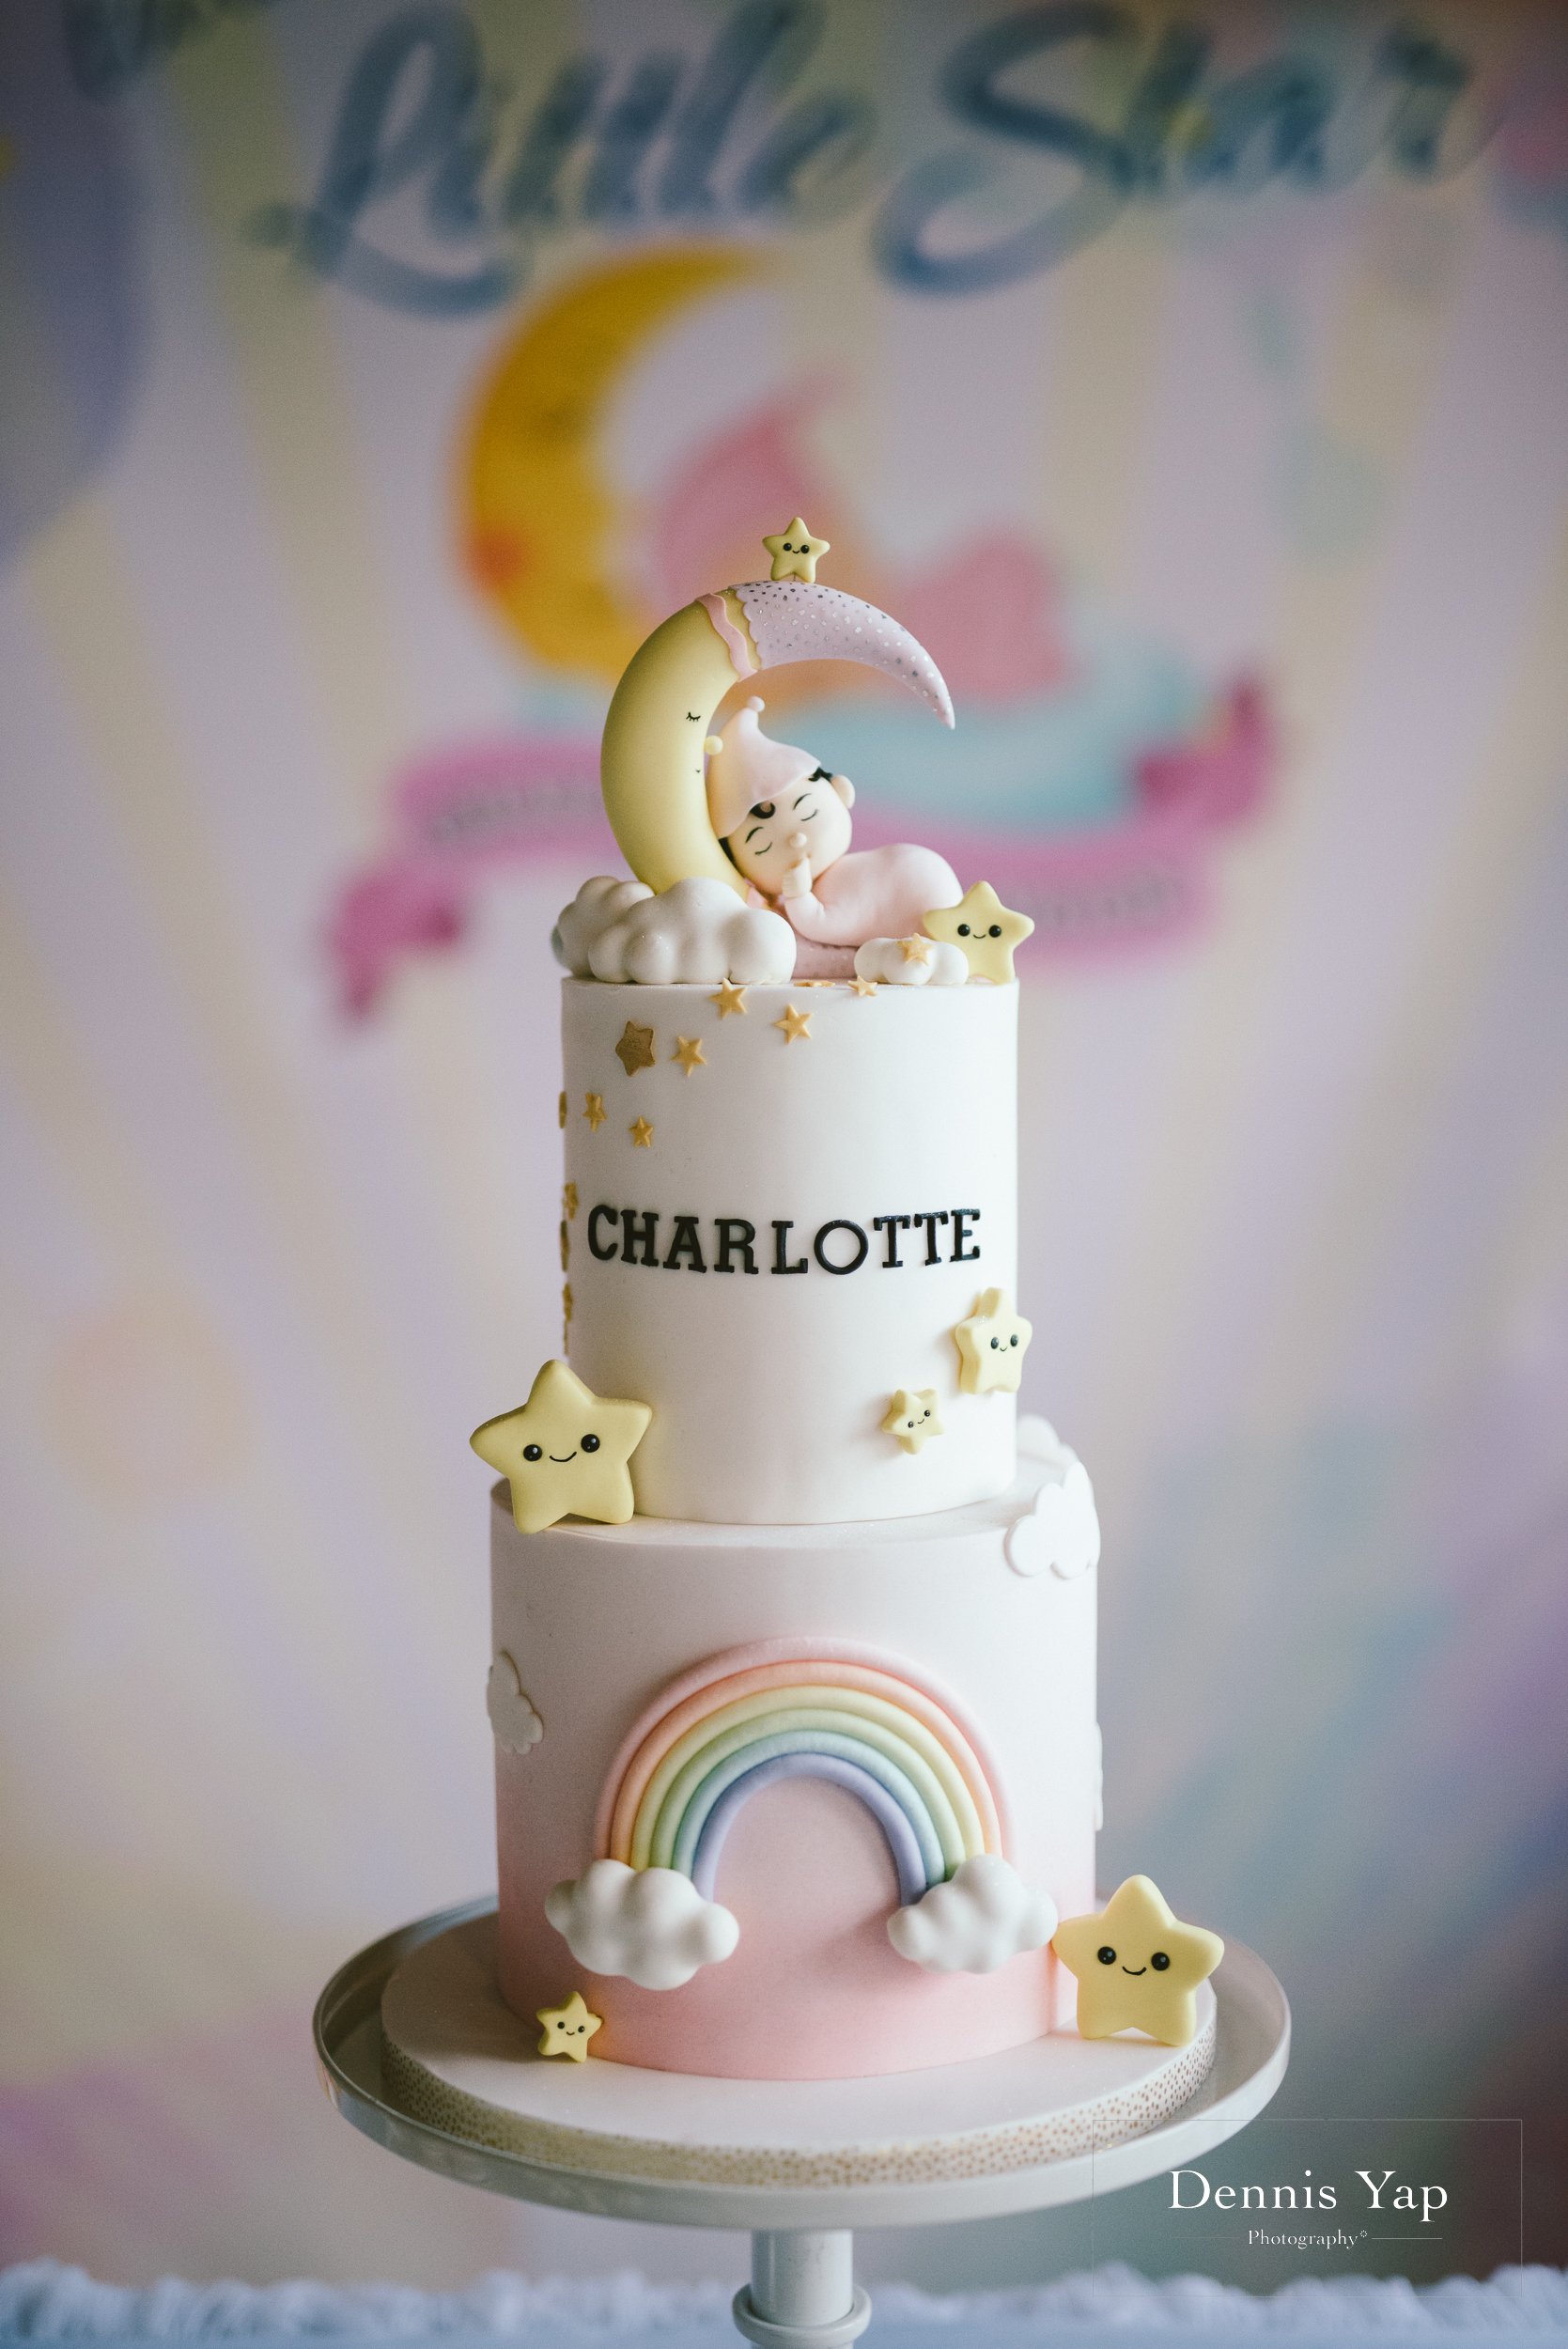 the story of charlotte alicia full moon baby party celebration dennis yap yellow apron malaysia family portrait photographer-4.jpg